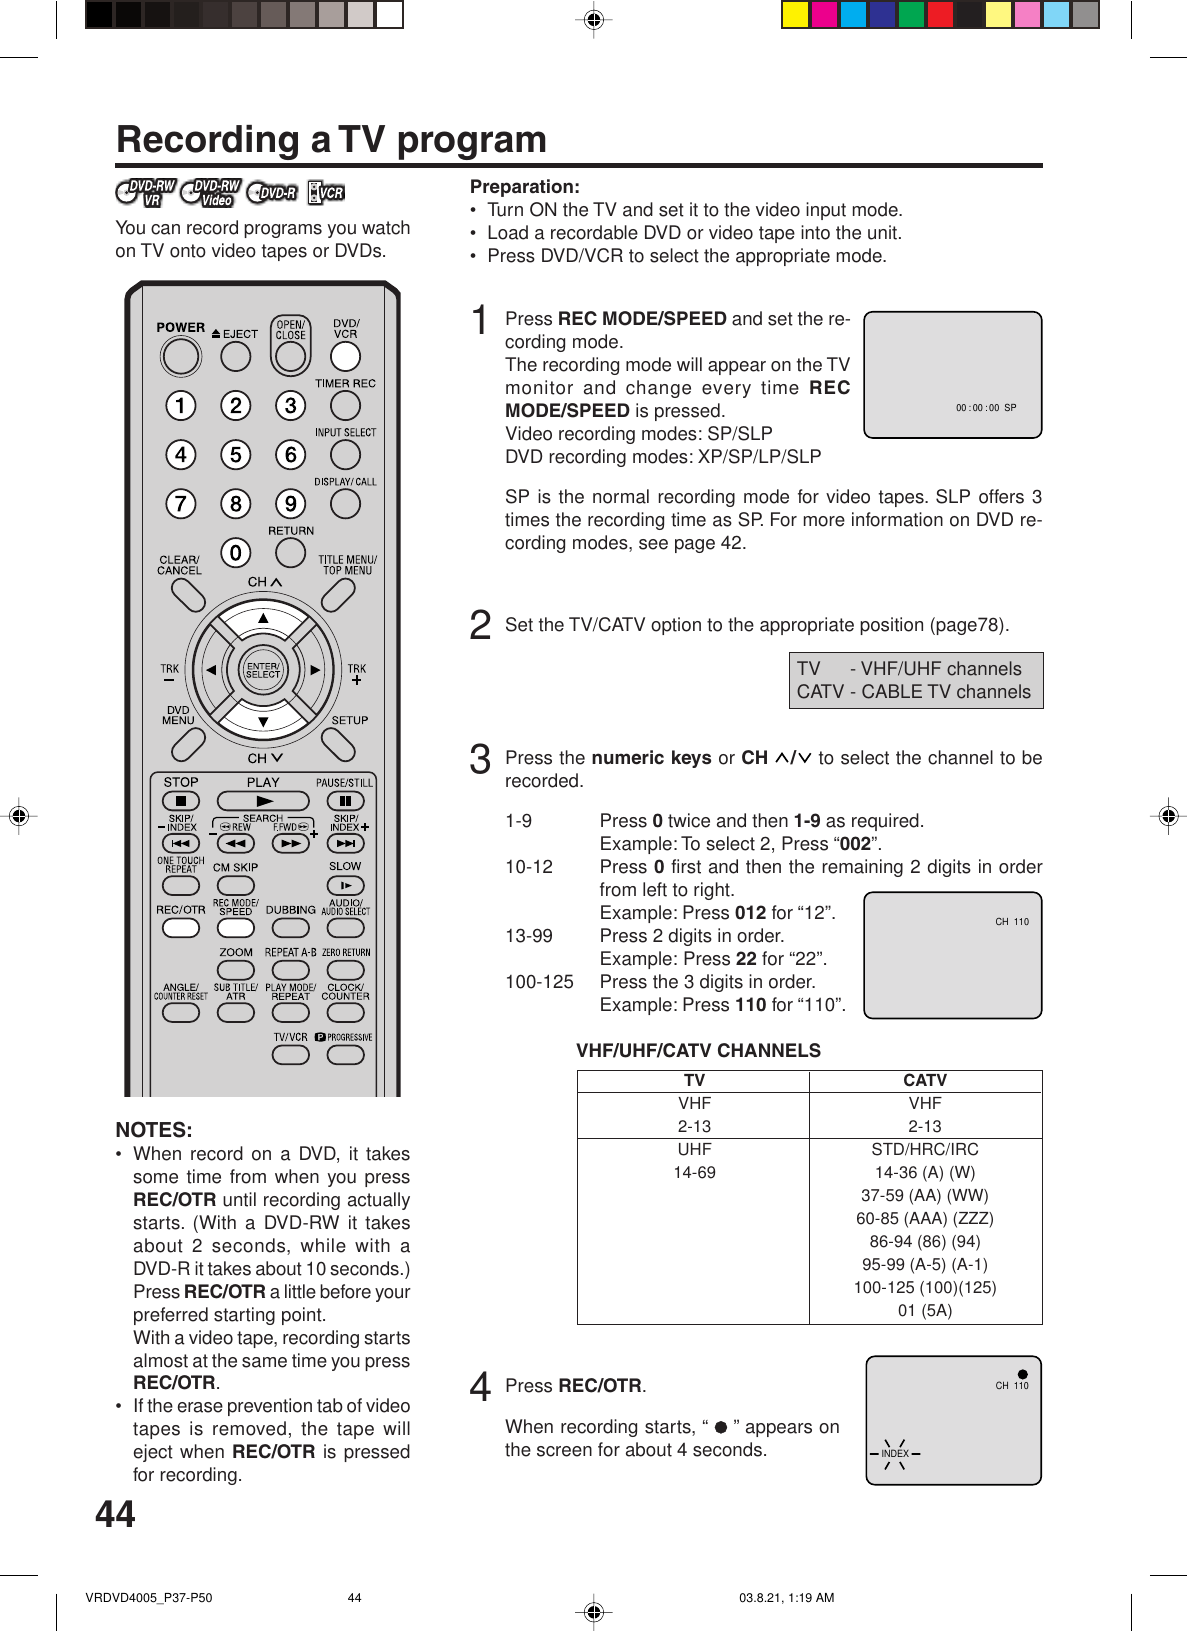 44Recording a TV programPreparation:•Turn ON the TV and set it to the video input mode.•Load a recordable DVD or video tape into the unit.•Press DVD/VCR to select the appropriate mode.1Press REC MODE/SPEED and set the re-cording mode.The recording mode will appear on the TVmonitor and change every time RECMODE/SPEED is pressed.Video recording modes: SP/SLPDVD recording modes: XP/SP/LP/SLPSP is the normal recording mode for video tapes. SLP offers 3times the recording time as SP. For more information on DVD re-cording modes, see page 42.2Set the TV/CATV option to the appropriate position (page78).3Press the numeric keys or CH  /  to select the channel to berecorded.1-9 Press 0 twice and then 1-9 as required.Example: To select 2, Press “002”.10-12 Press 0 first and then the remaining 2 digits in orderfrom left to right.Example: Press 012 for “12”.13-99 Press 2 digits in order.Example: Press 22 for “22”.100-125 Press the 3 digits in order.Example: Press 110 for “110”.VHF/UHF/CATV CHANNELS4Press REC/OTR.When recording starts, “  ” appears onthe screen for about 4 seconds.NOTES:•When record on a DVD, it takessome time from when you pressREC/OTR until recording actuallystarts. (With a DVD-RW it takesabout 2 seconds, while with aDVD-R it takes about 10 seconds.)Press REC/OTR a little before yourpreferred starting point.With a video tape, recording startsalmost at the same time you pressREC/OTR.•If the erase prevention tab of videotapes is removed, the tape willeject when REC/OTR is pressedfor recording.You can record programs you watchon TV onto video tapes or DVDs.TVVHF2-13UHF14-69CATVVHF2-13STD/HRC/IRC14-36 (A) (W)37-59 (AA) (WW)60-85 (AAA) (ZZZ)86-94 (86) (94)95-99 (A-5) (A-1)100-125 (100)(125)01 (5A)TV - VHF/UHF channelsCATV - CABLE TV channels00 : 00 : 00  SPCH  110CH  110INDEXVRDVD4005_P37-P50 03.8.21, 1:19 AM44